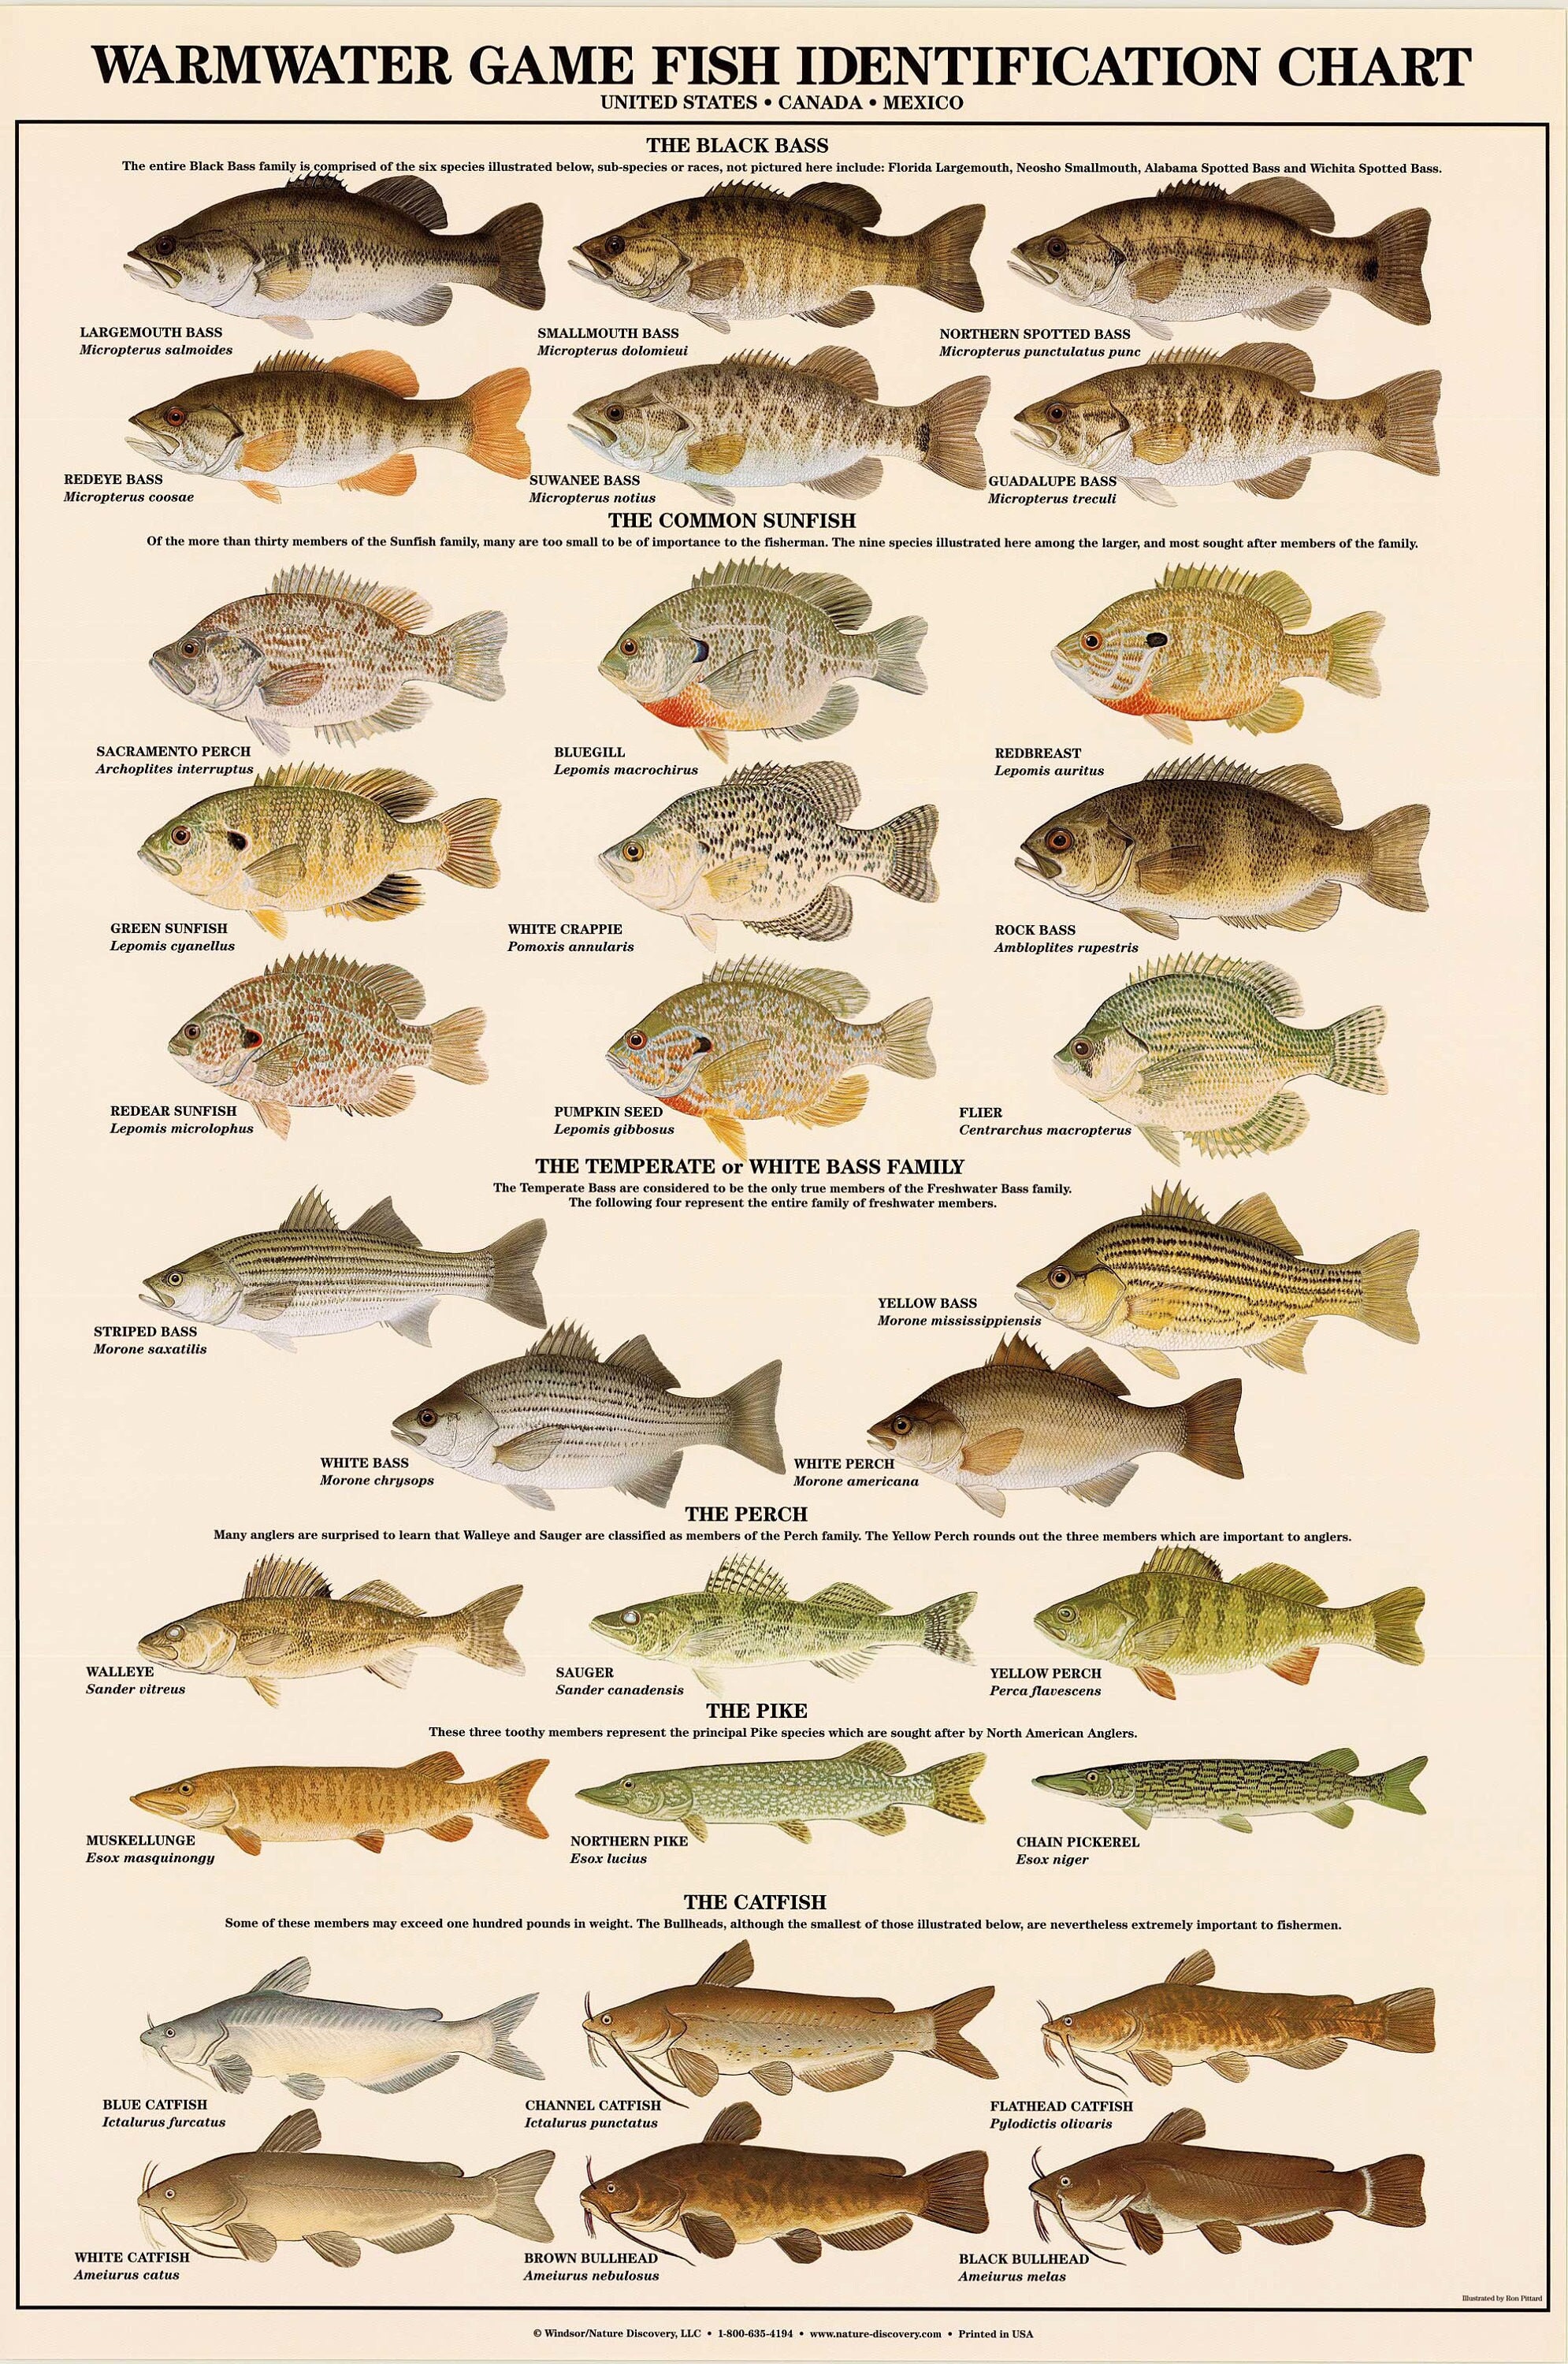 Warmwater Game Fish Poster, Identification Chart and Fishermen Guide -   Canada